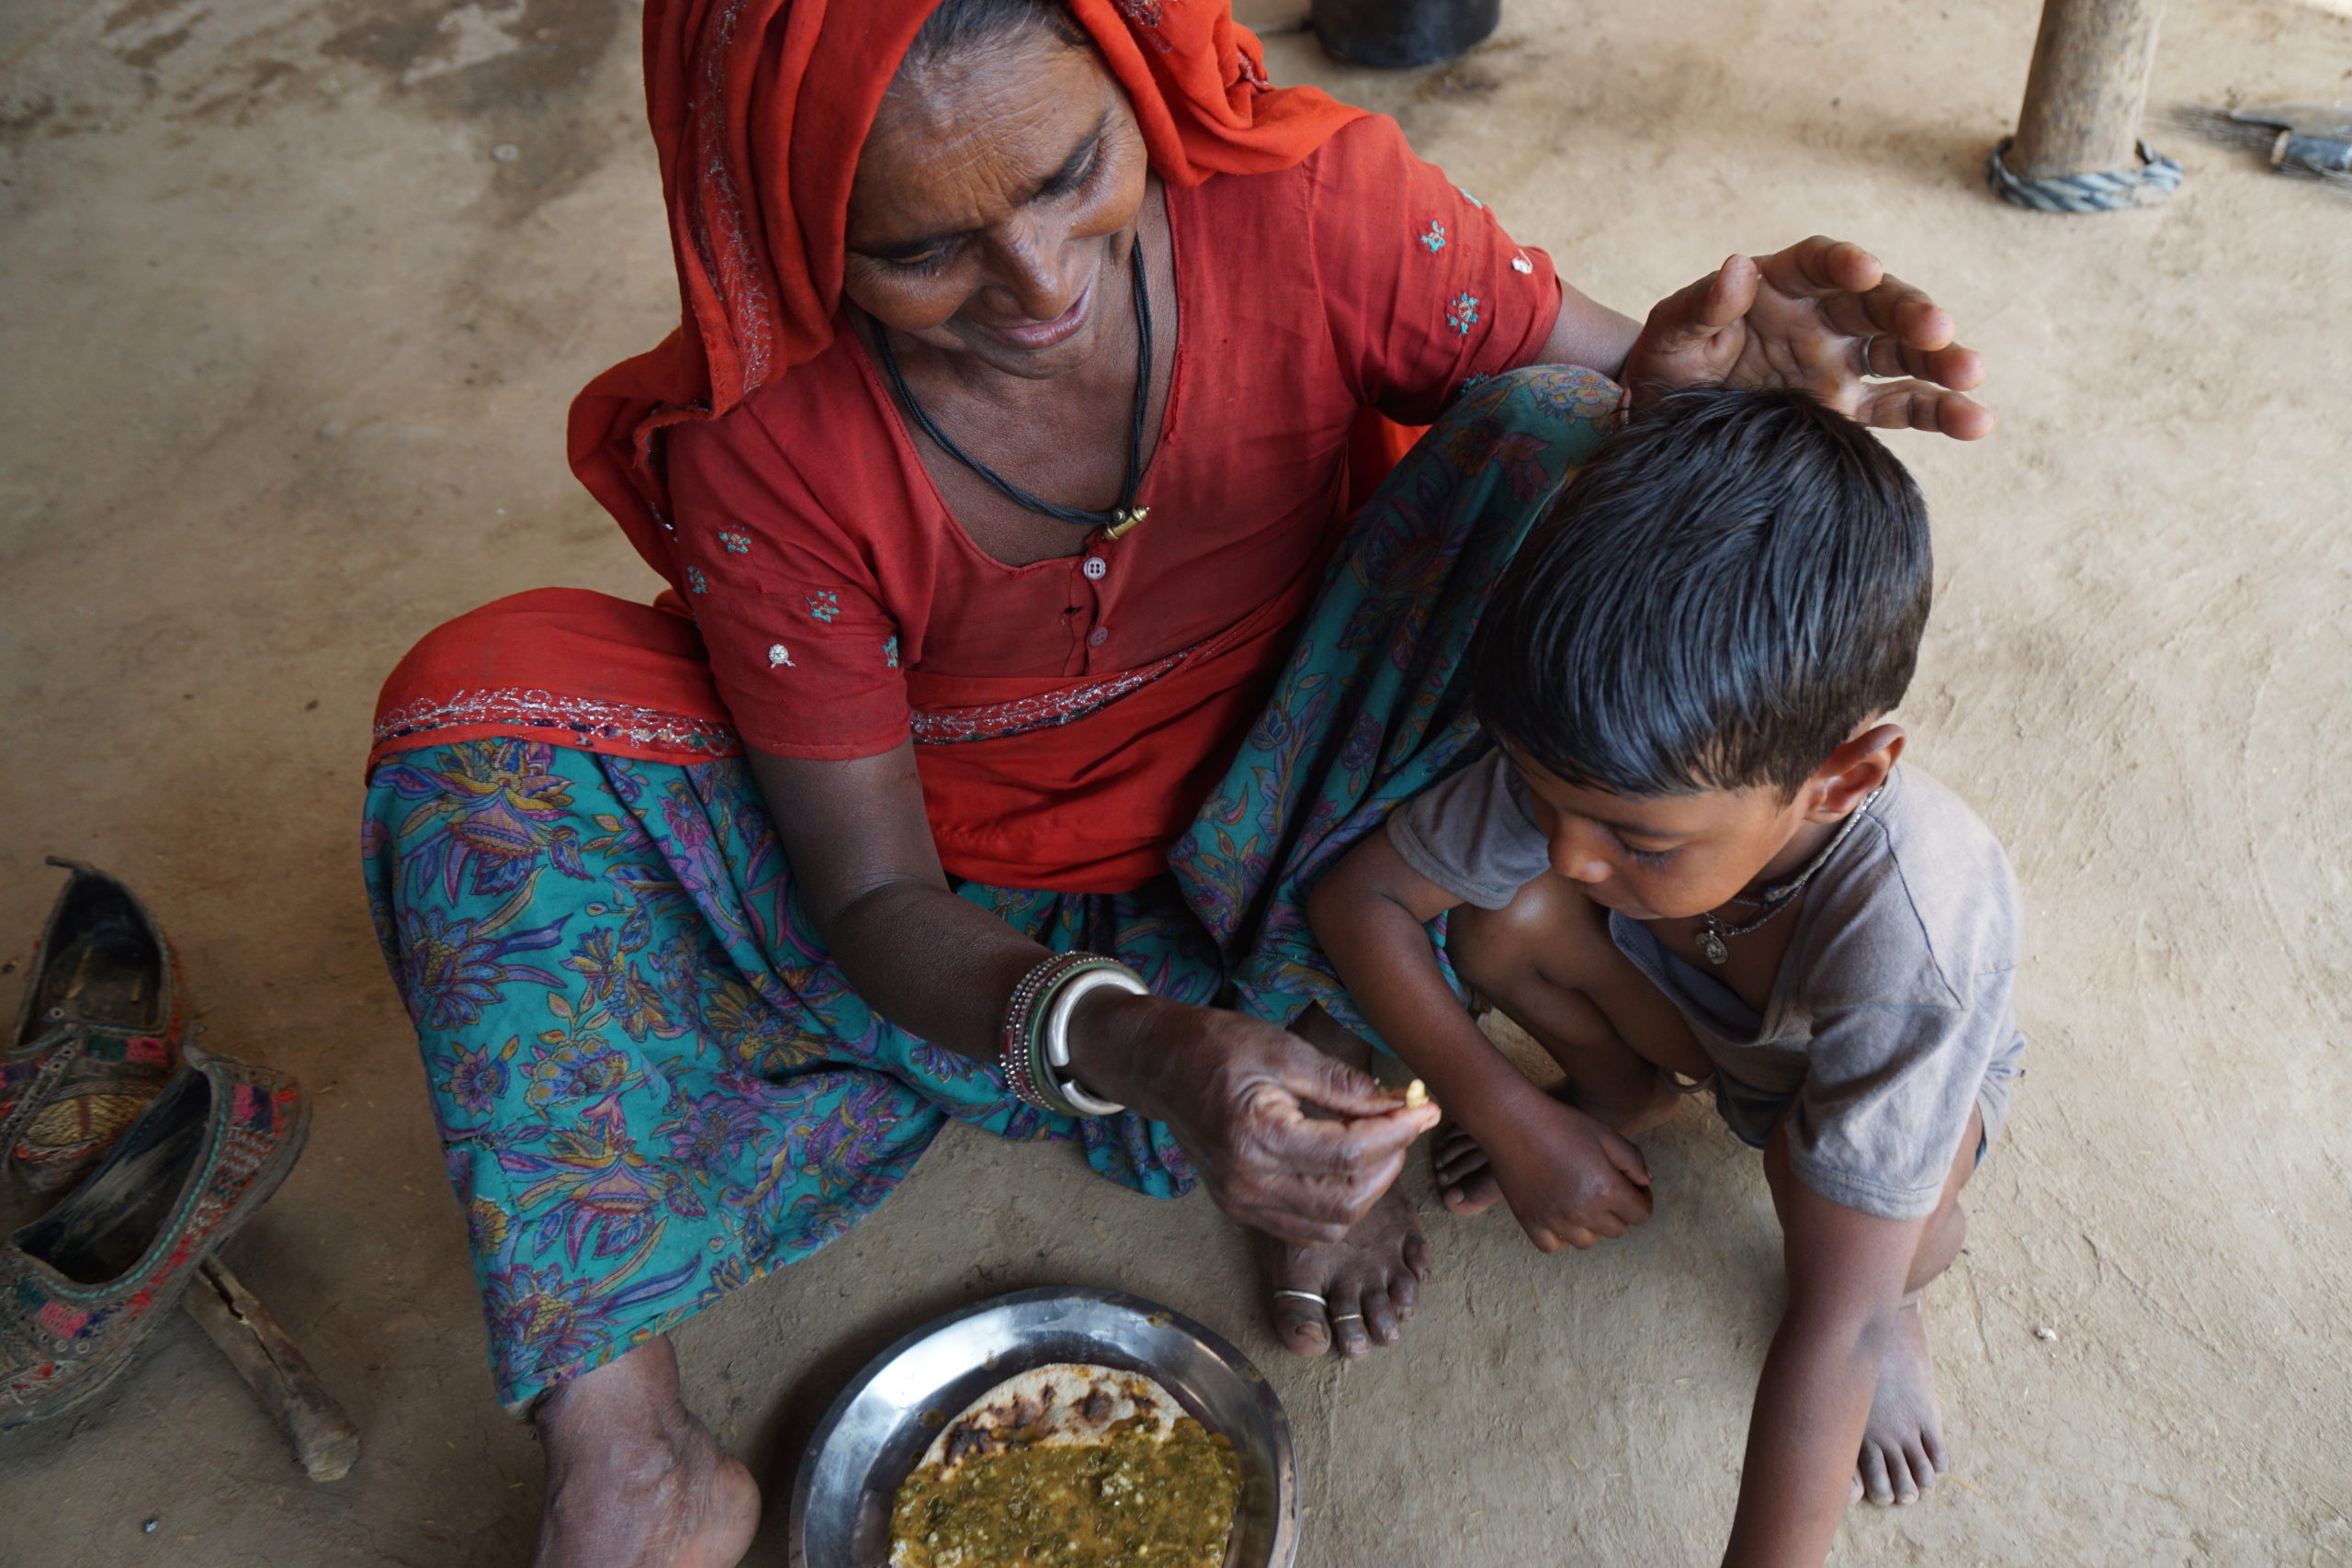 Malnutrition in India: The problem and solutions